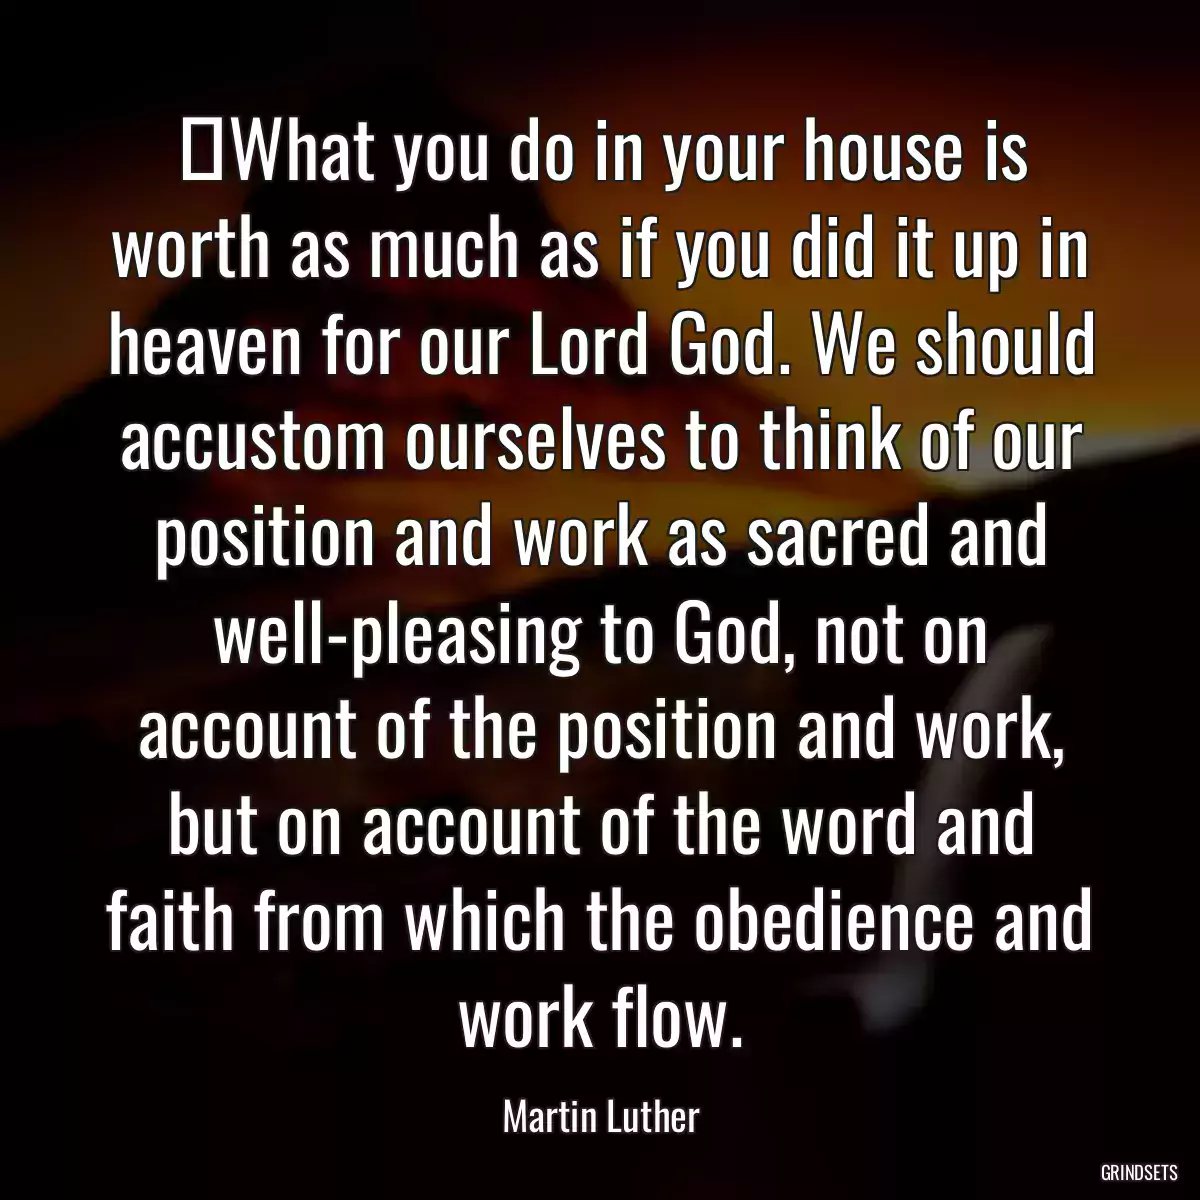 ‎What you do in your house is worth as much as if you did it up in heaven for our Lord God. We should accustom ourselves to think of our position and work as sacred and well-pleasing to God, not on account of the position and work, but on account of the word and faith from which the obedience and work flow.